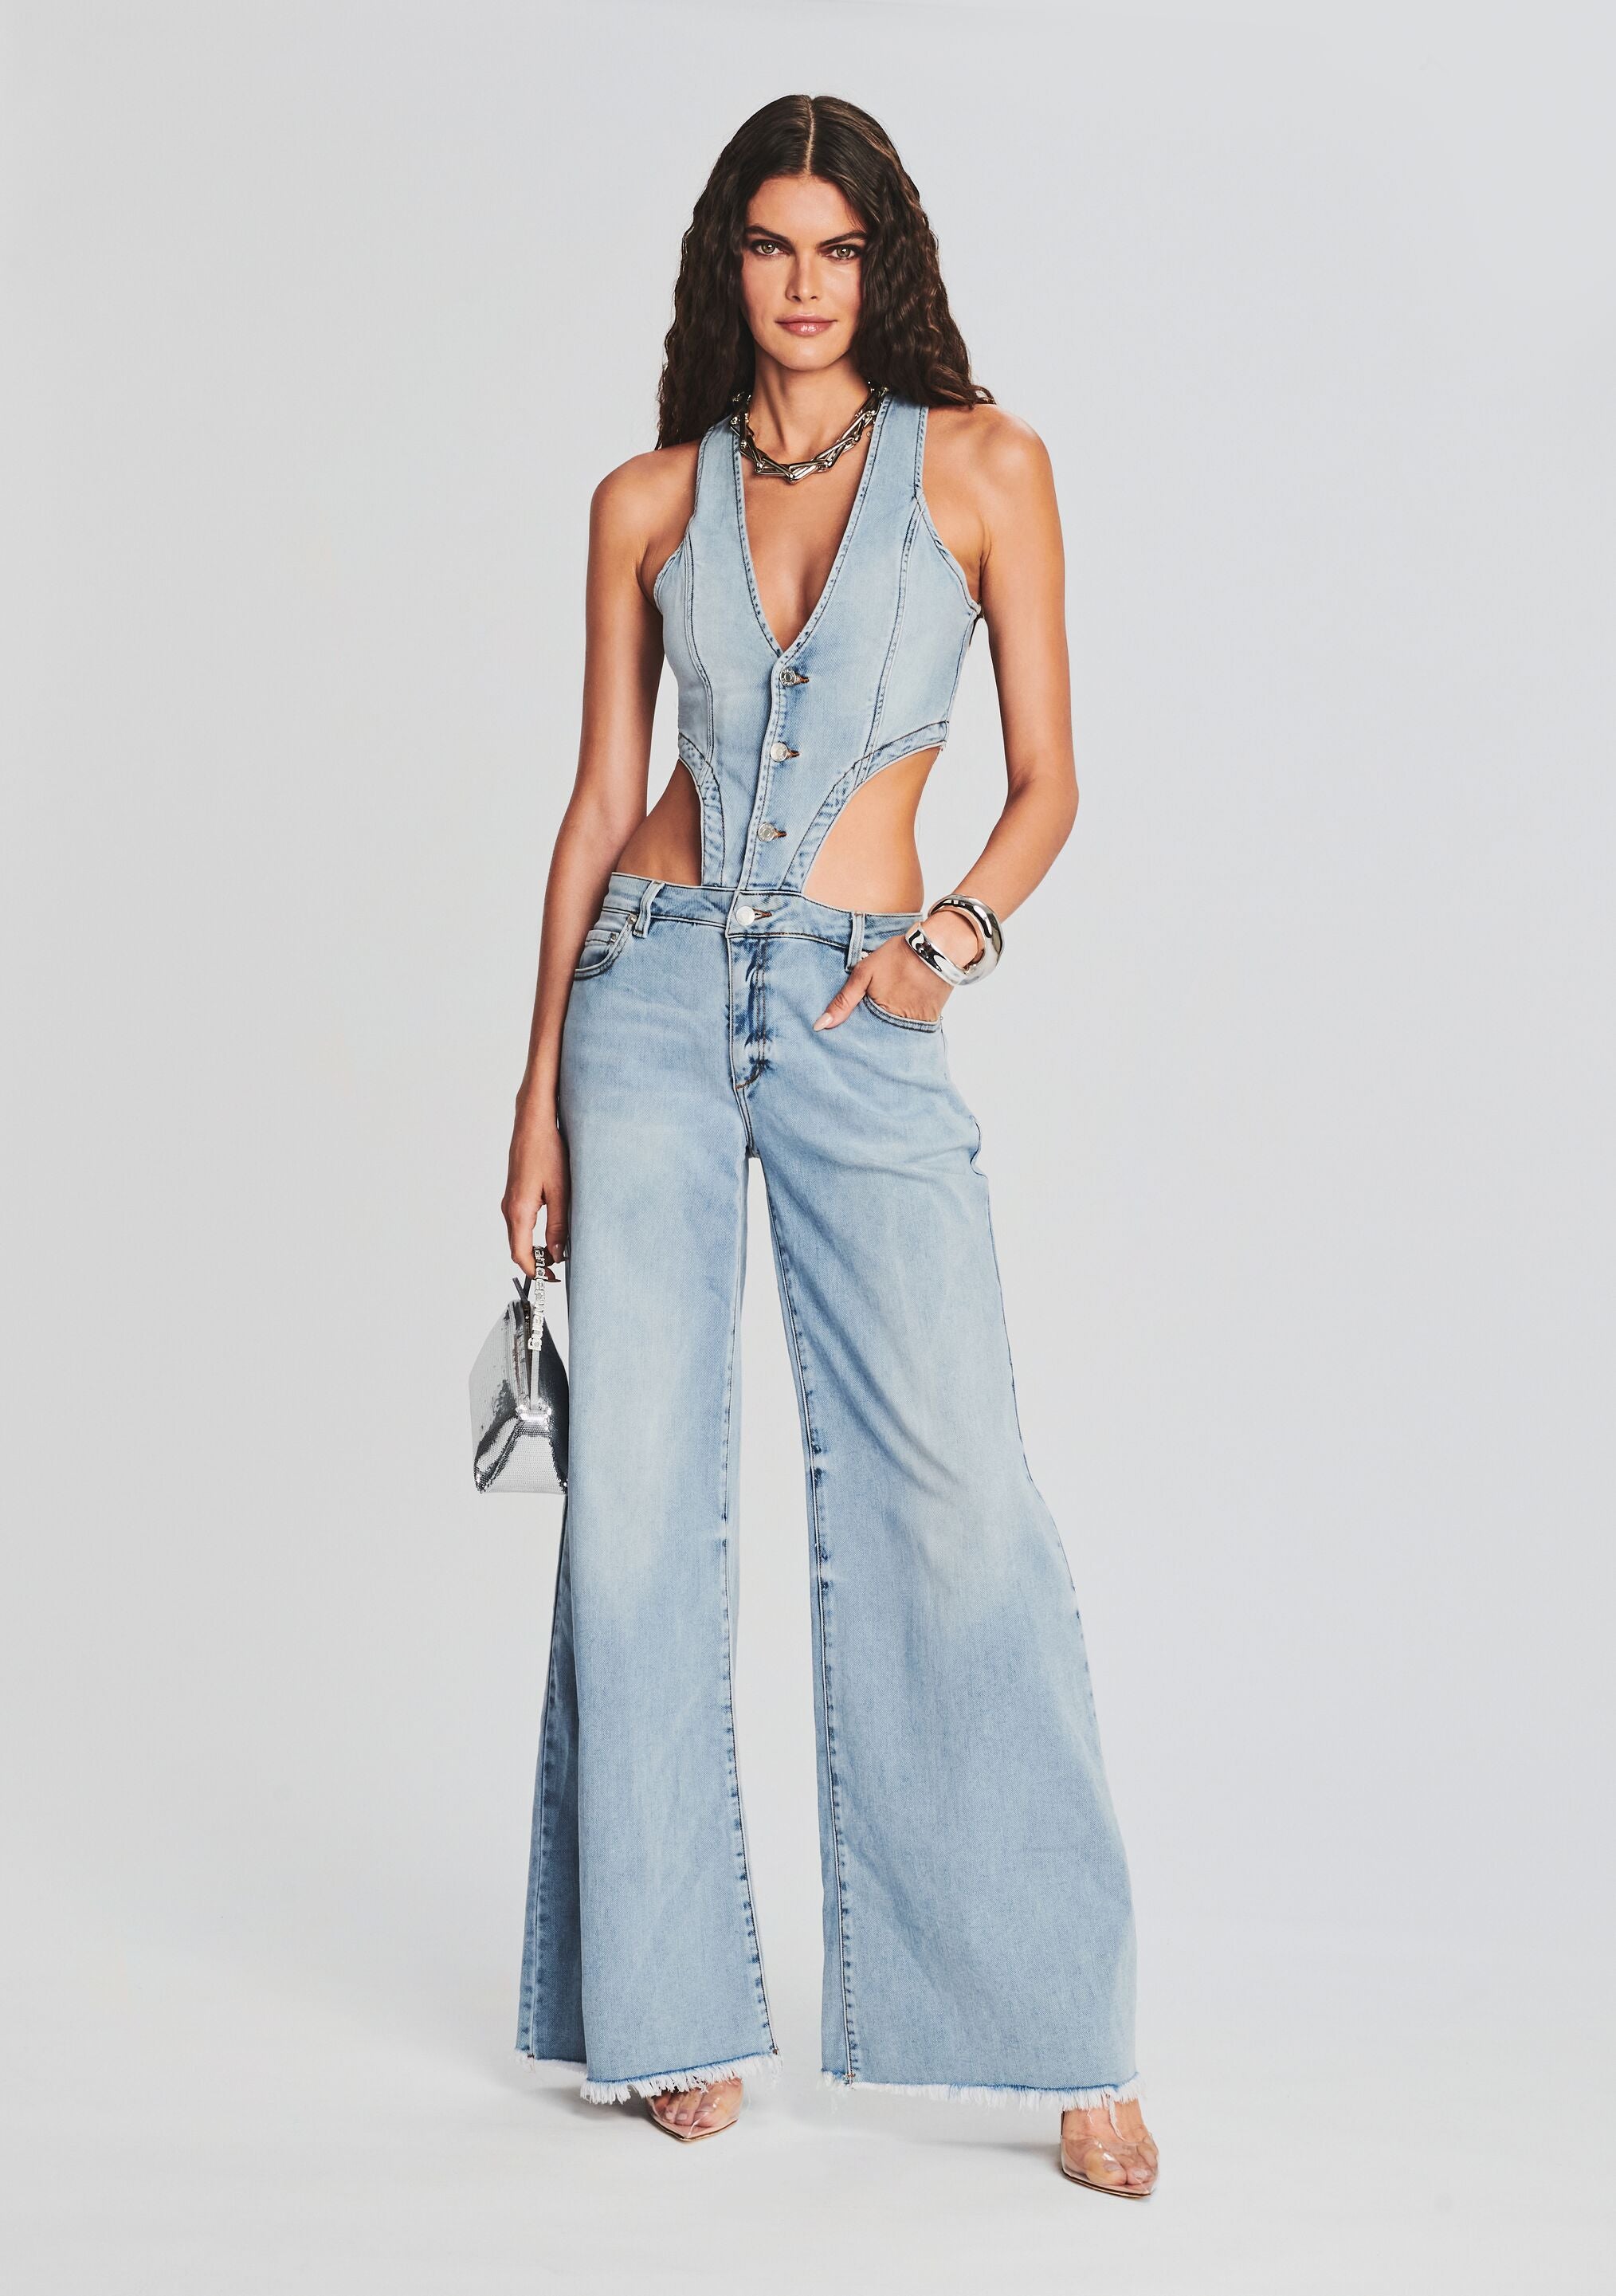 New Womens Denim Overalls Casual Jumpsuit Jeans Loose Trousers Pants  Rompers Hot | eBay